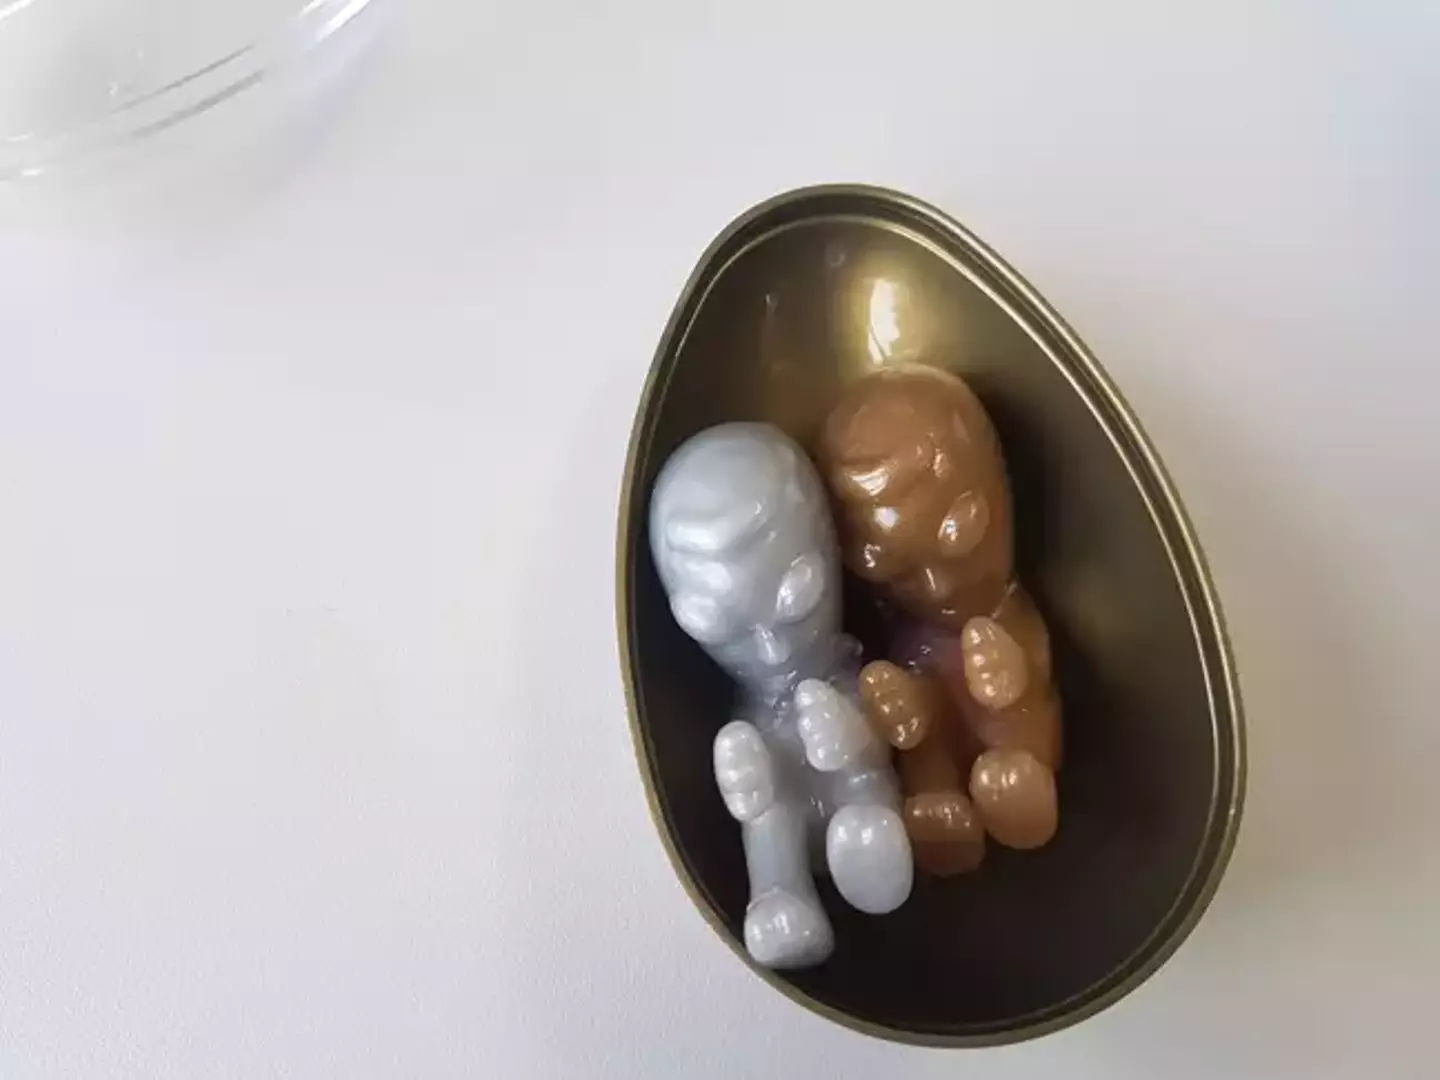 Where do alien babies come from?